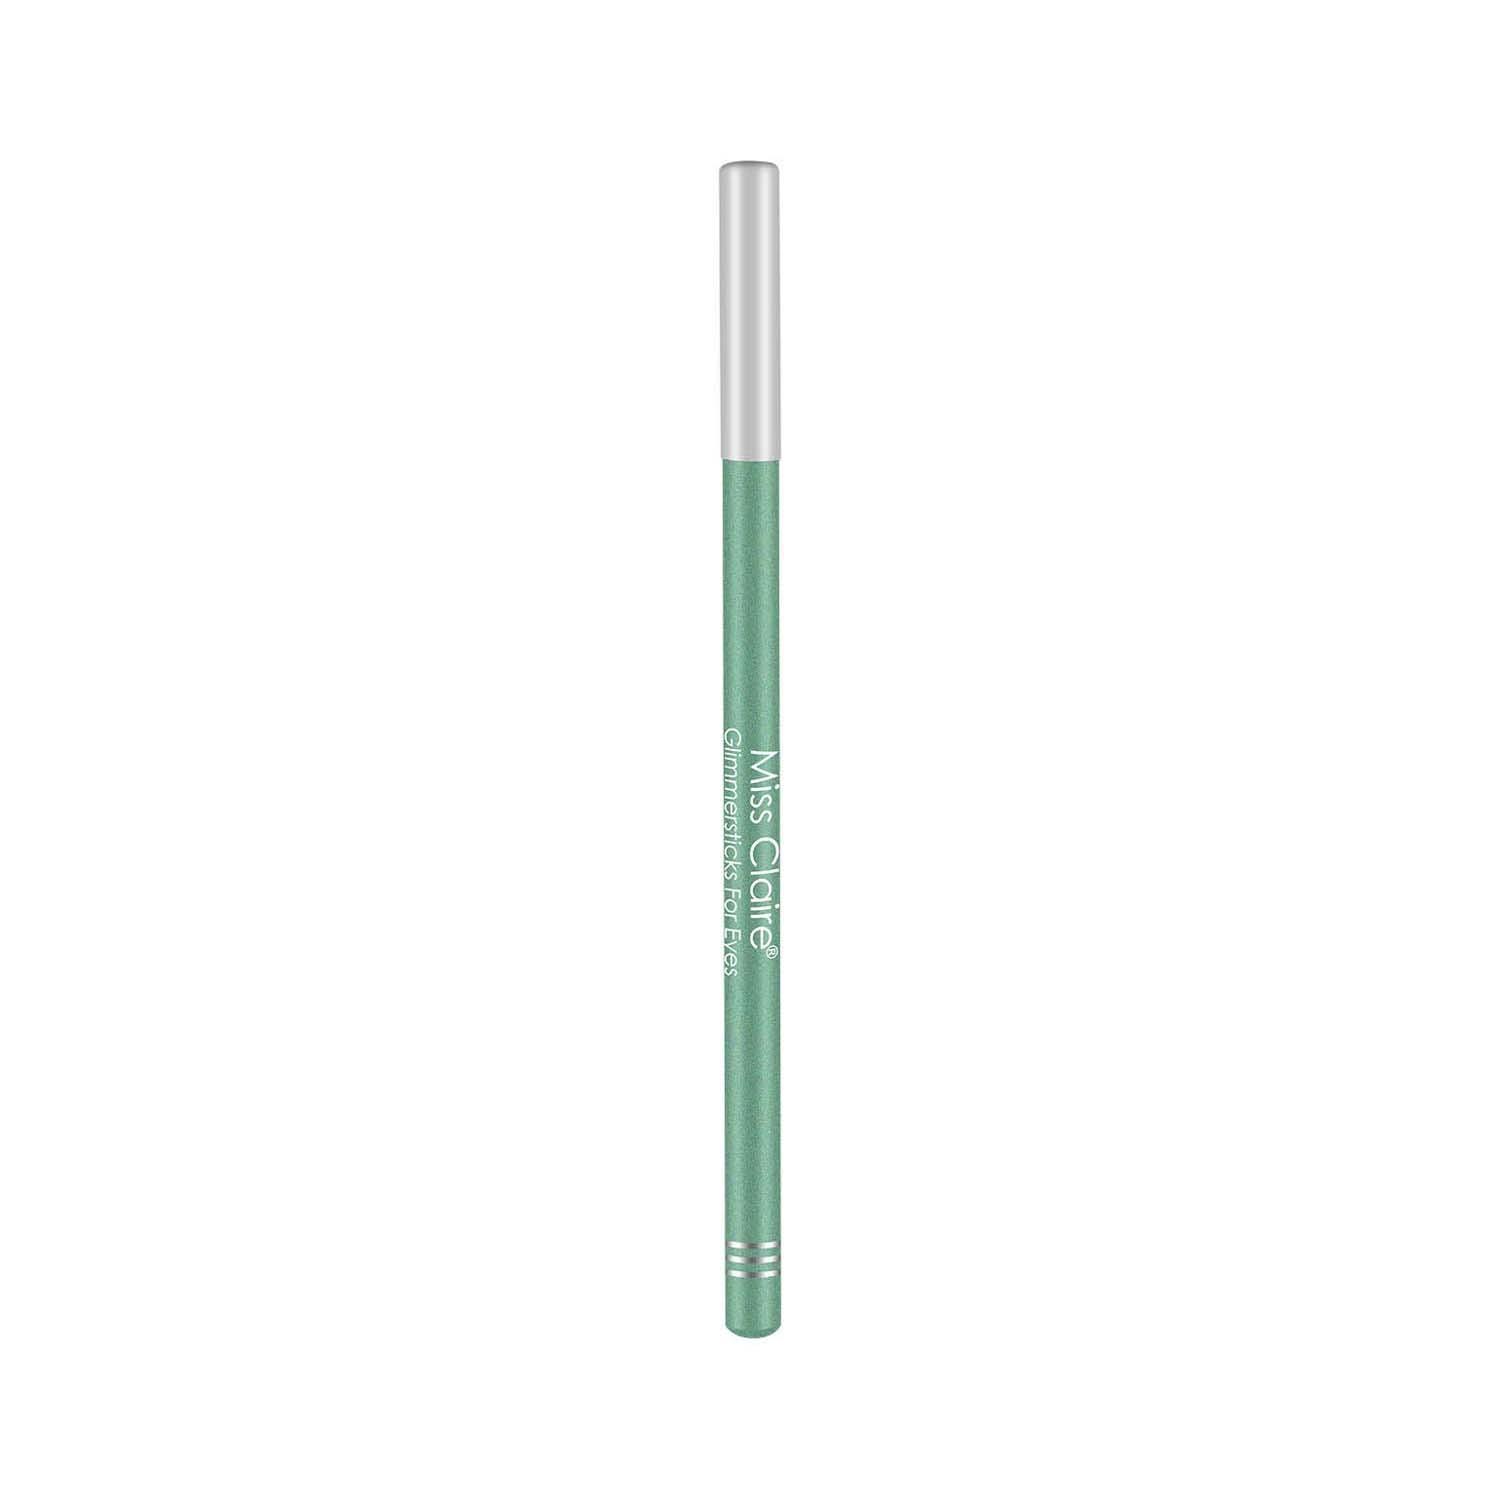 Miss Claire Glimmersticks For Eyes - E-20 Jade (1.8g)